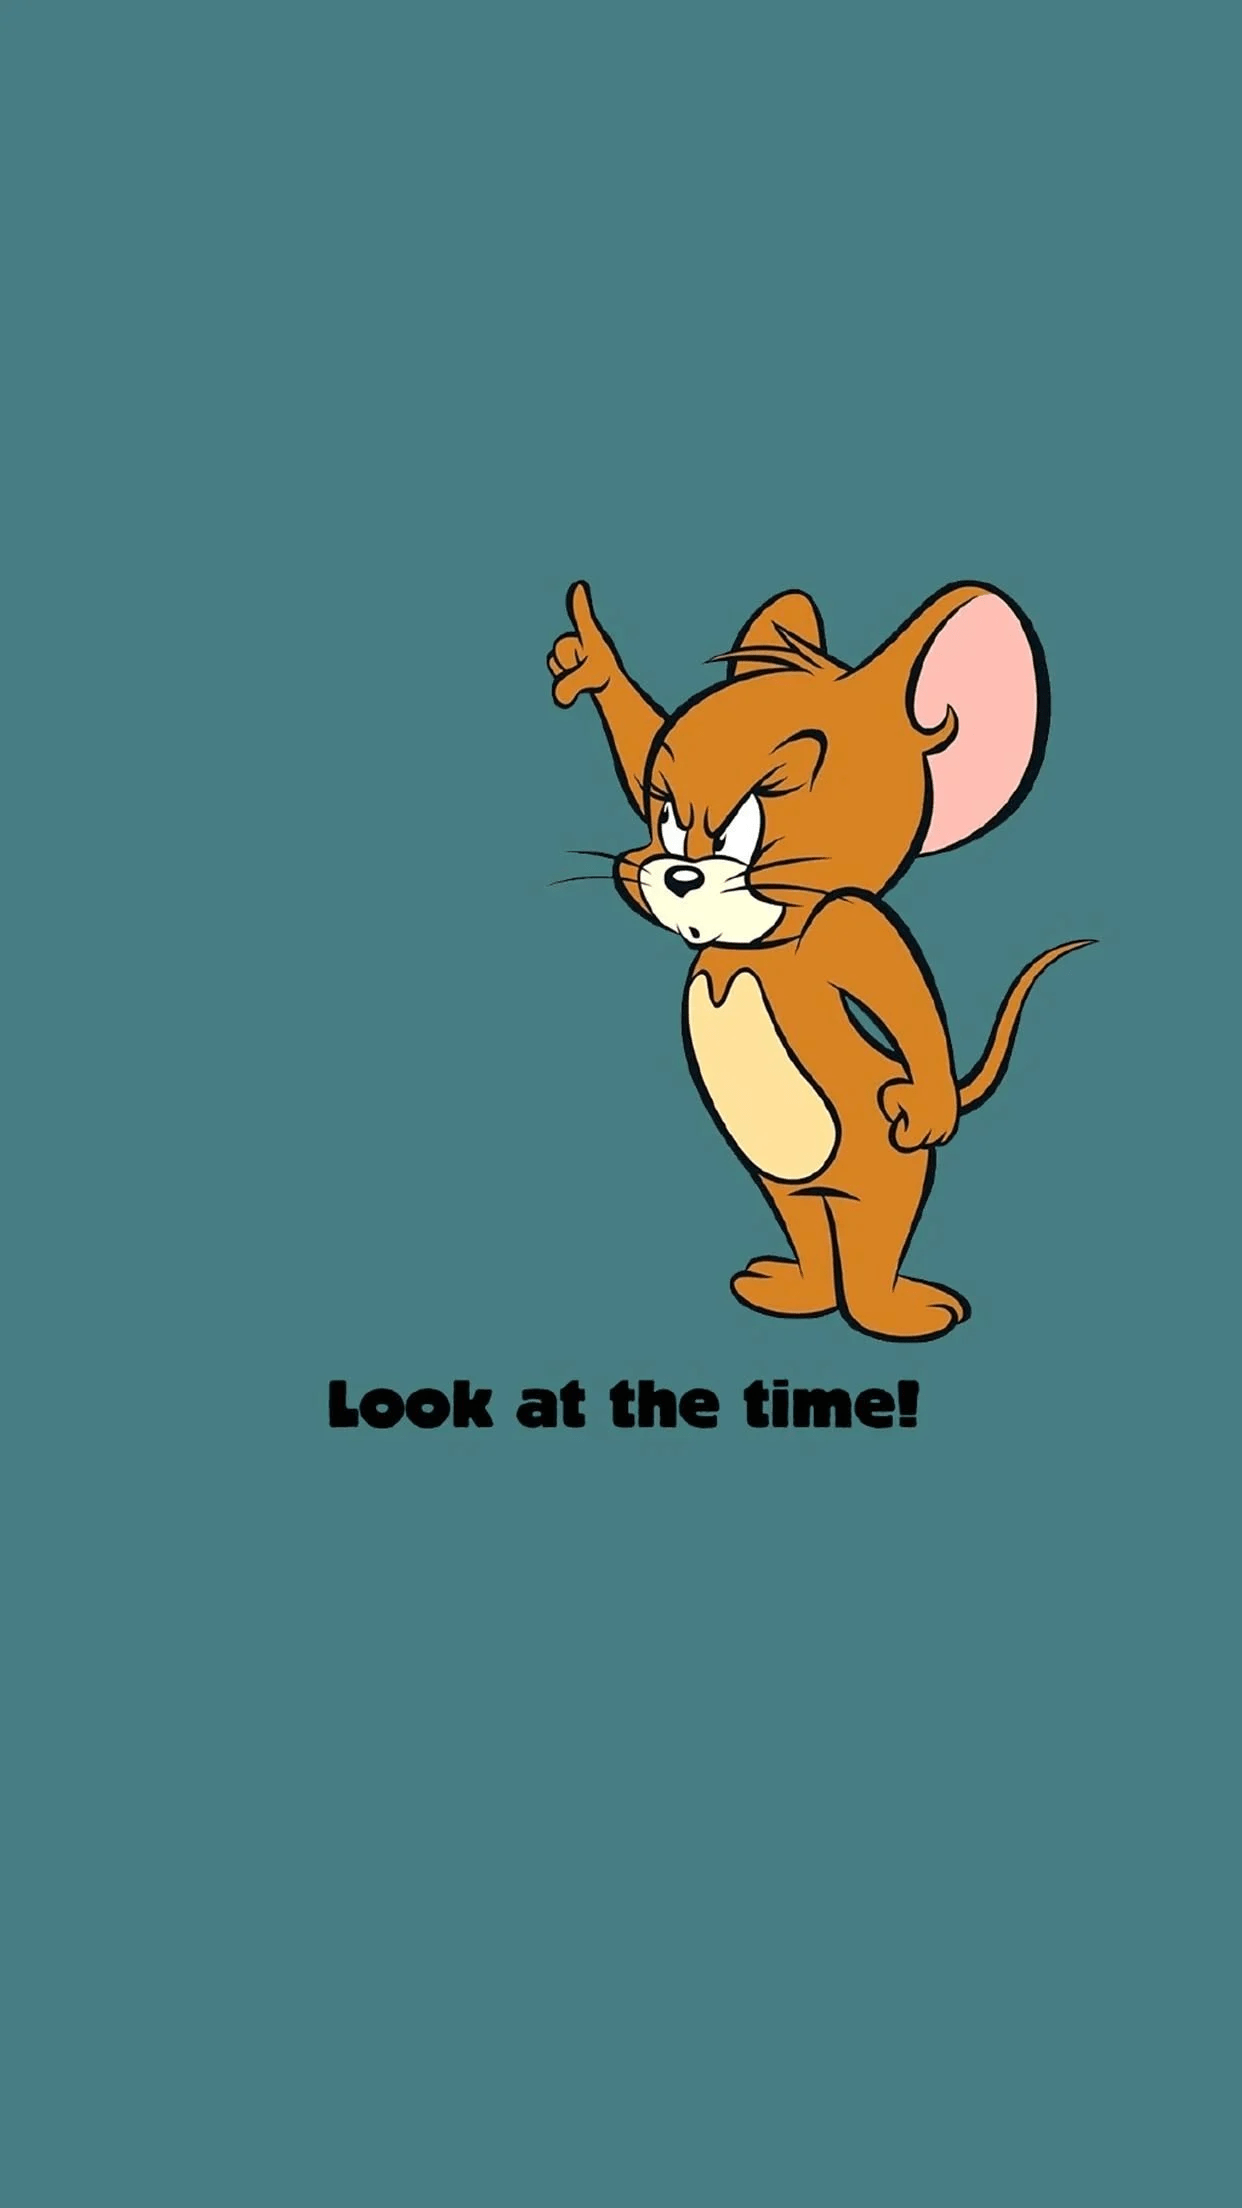 Jerry Mouse cartoon wallpaper for iPhone with quote 